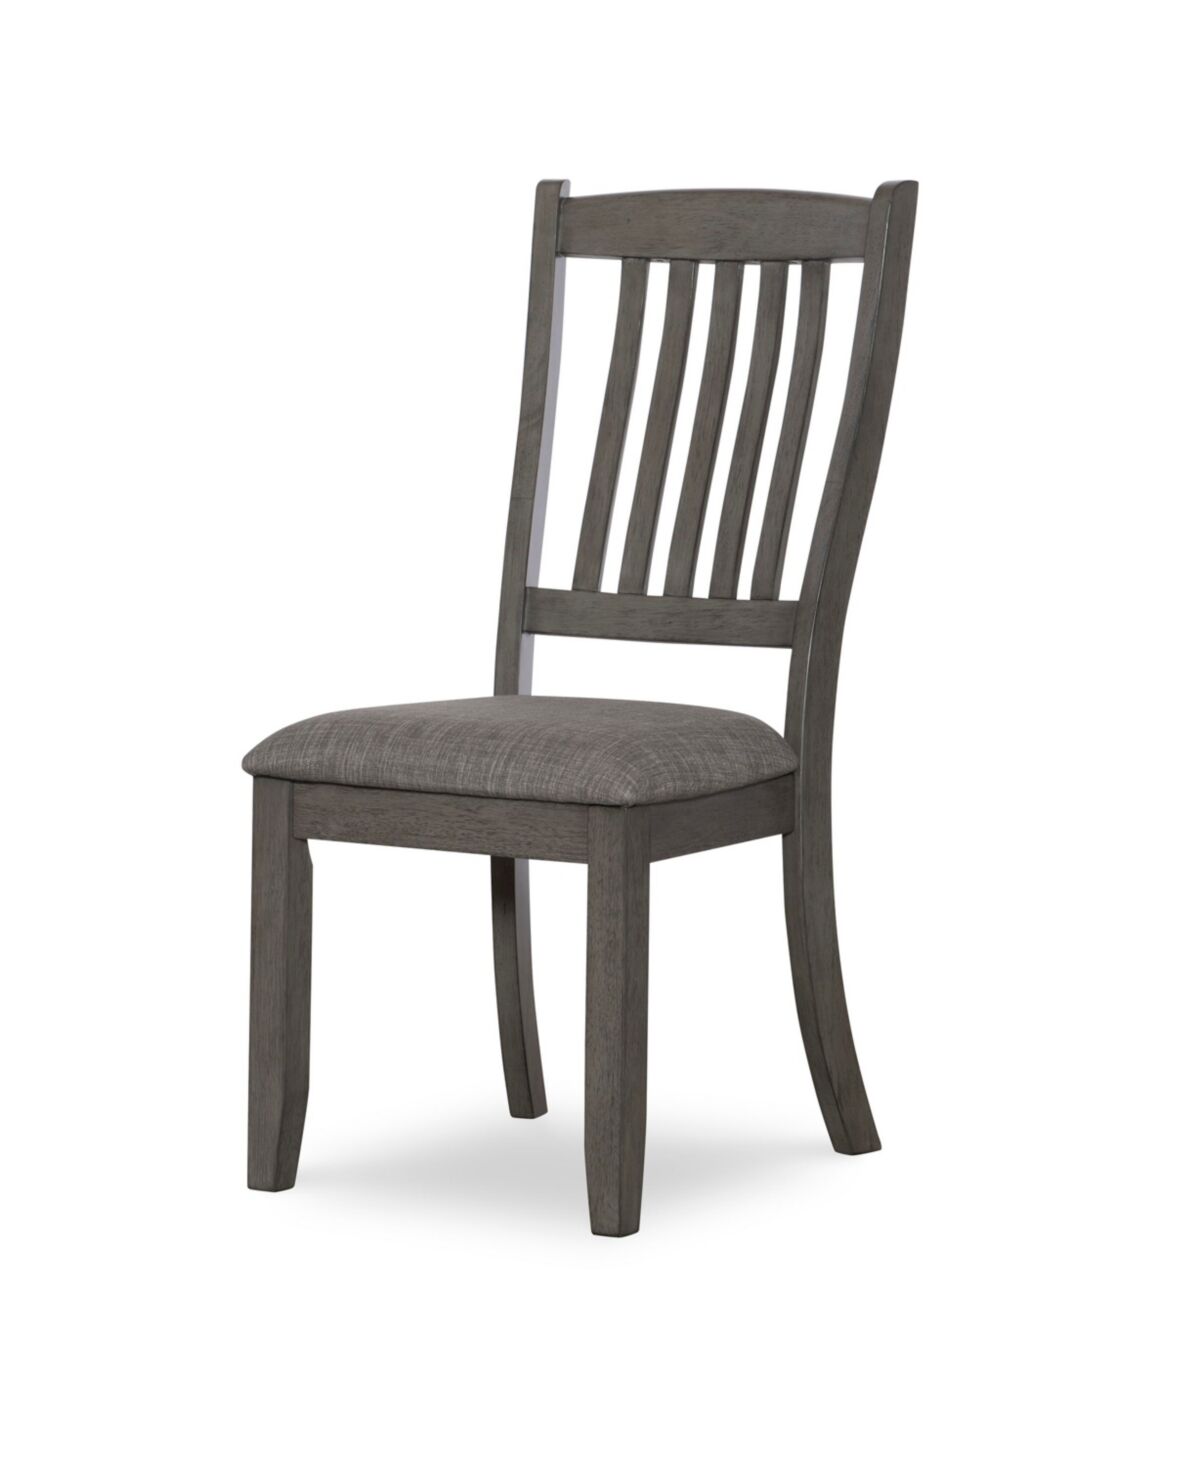 Home Furniture Outfitters Allston Park Gray Farmhouse Dining Chair - Gray